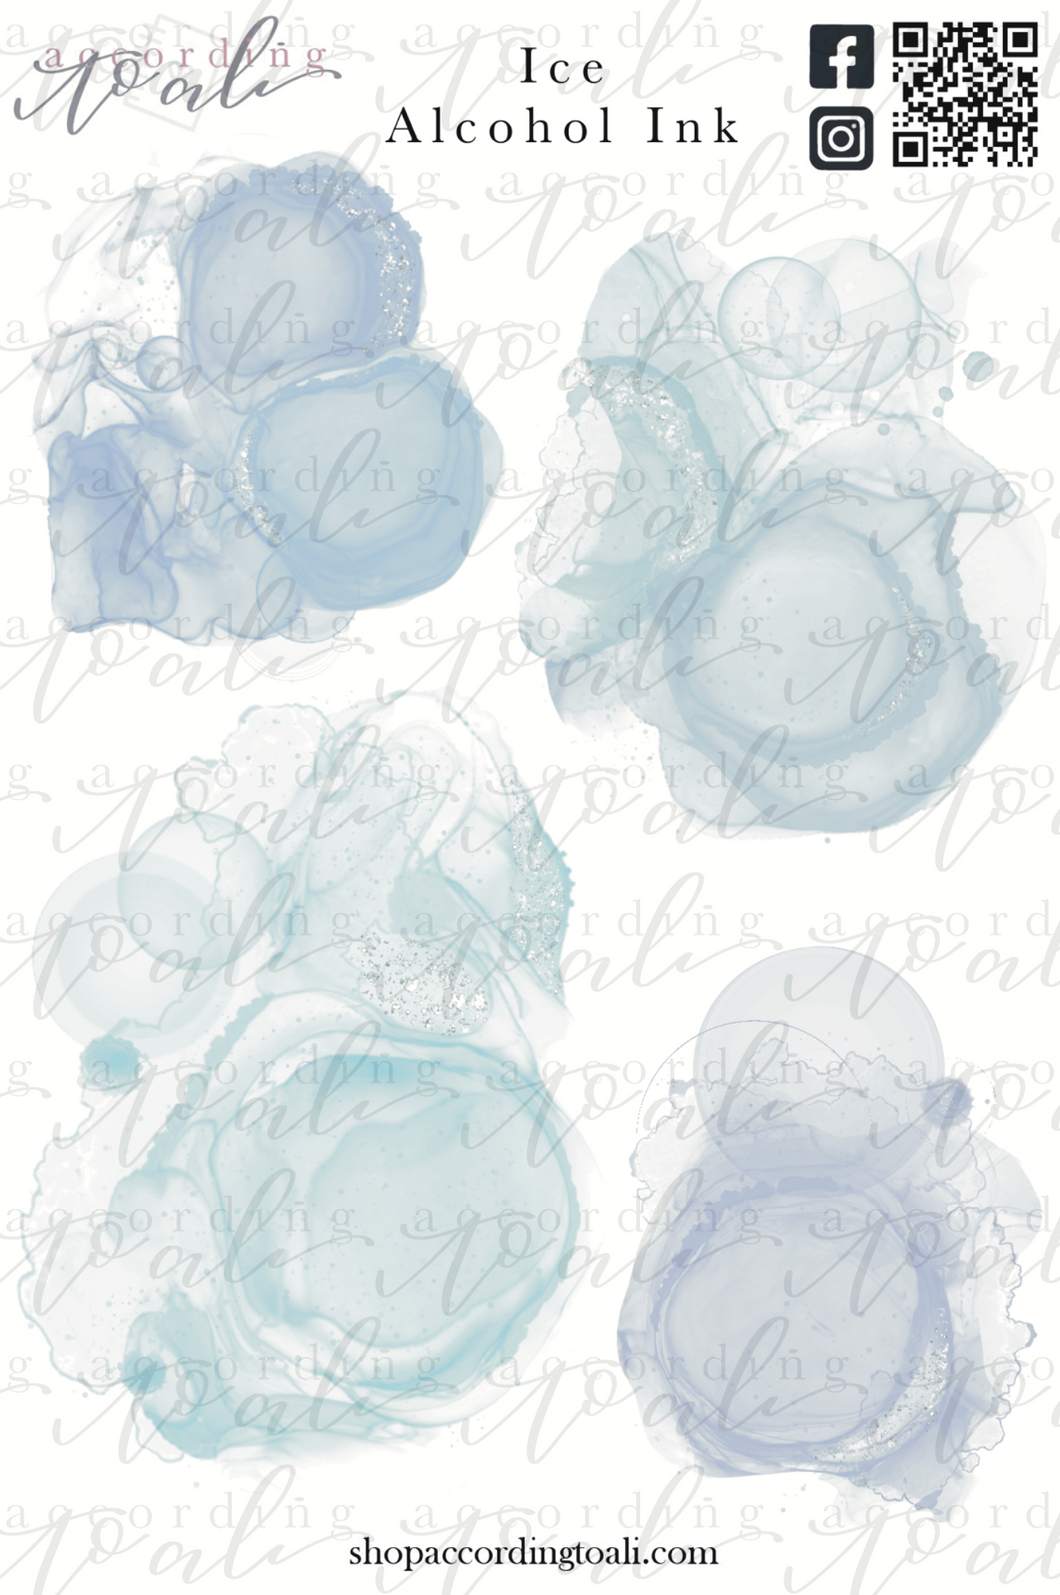 Ice Alcohol Ink Sticker Sheet